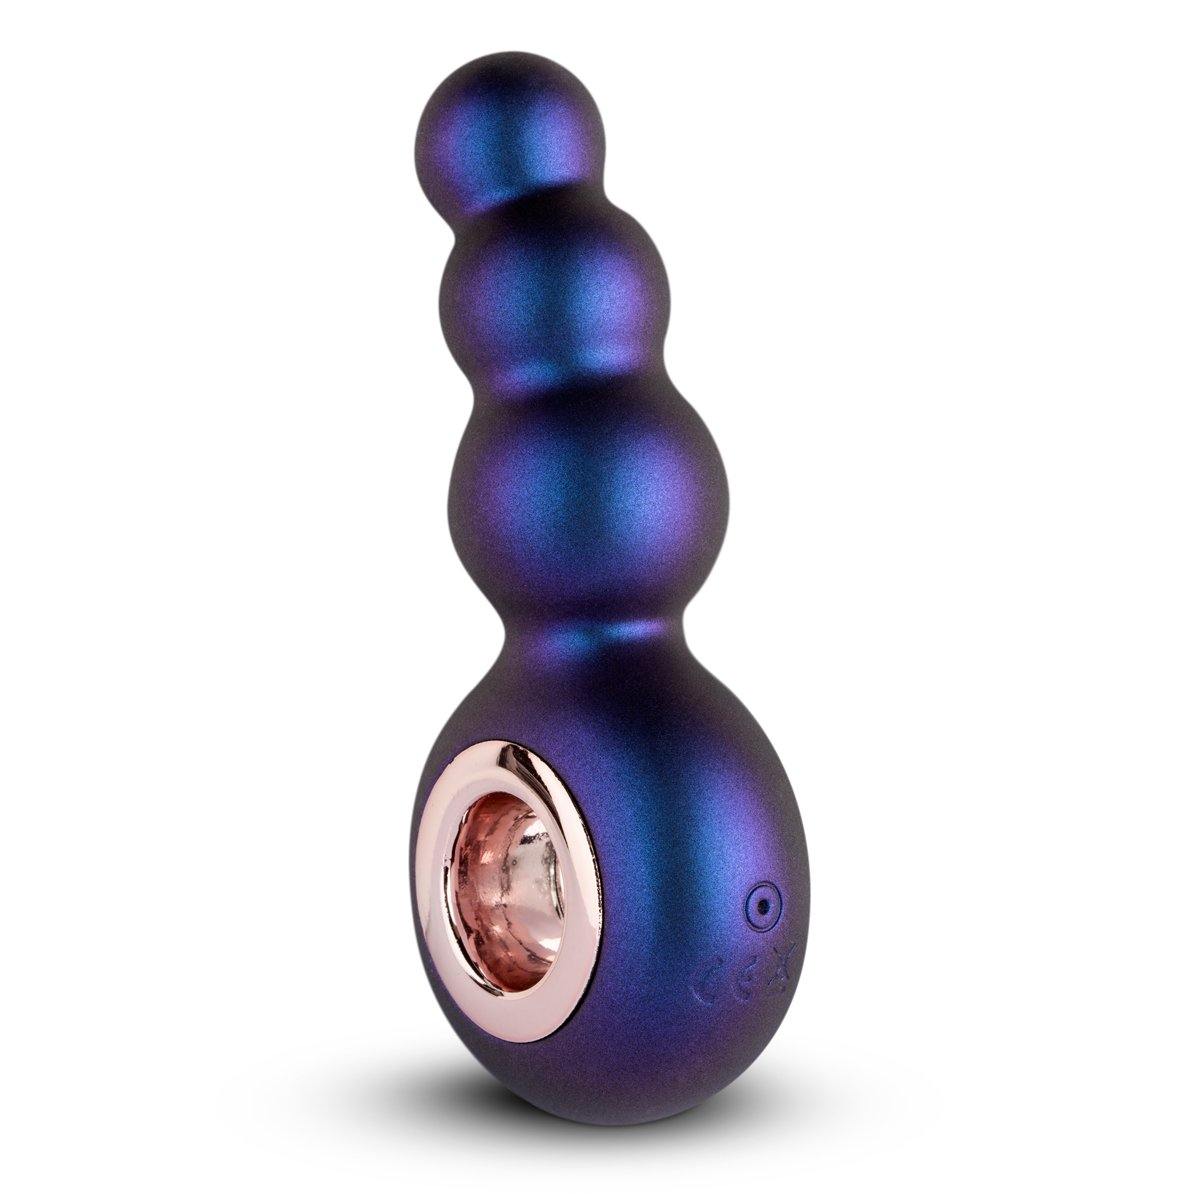 Hueman Outer Space Vibrating Anal Plug - Buy At Luxury Toy X - Free 3-Day Shipping